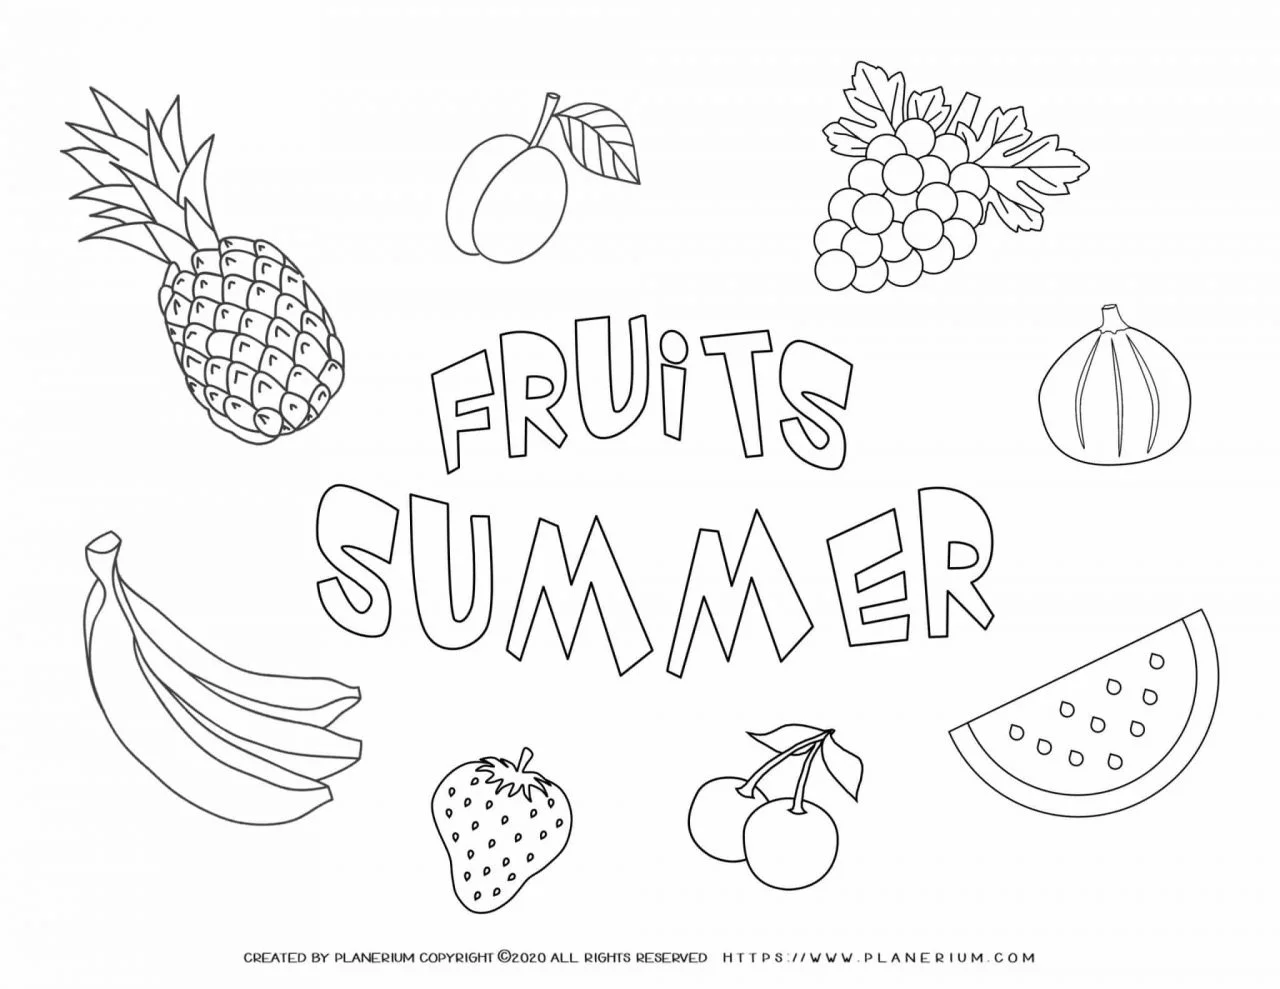 How To Draw Summer Stuff For Kids: Fun And Easy Step-By-Step Drawing Book  for Boys And Girls: Learn to Draw Cute Things Like Animals, Fruits,  Vehicles, and More: Place, HappyKids: 9798396842403: Amazon.com: